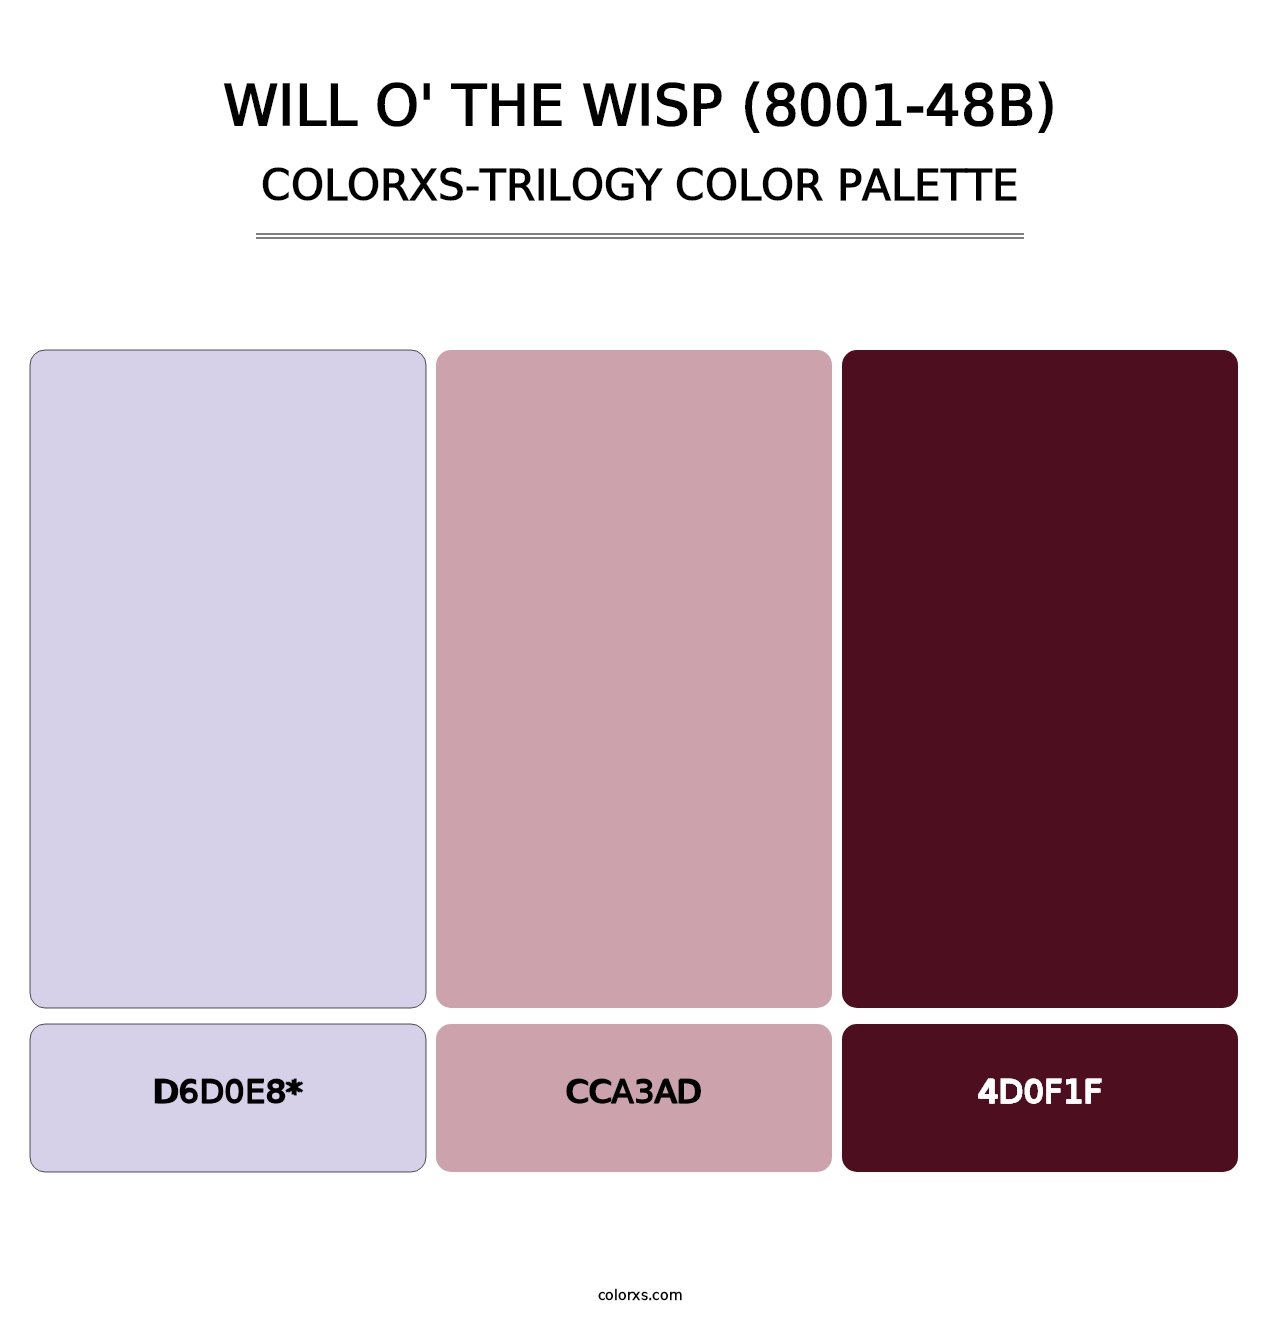 Will o' the Wisp (8001-48B) - Colorxs Trilogy Palette